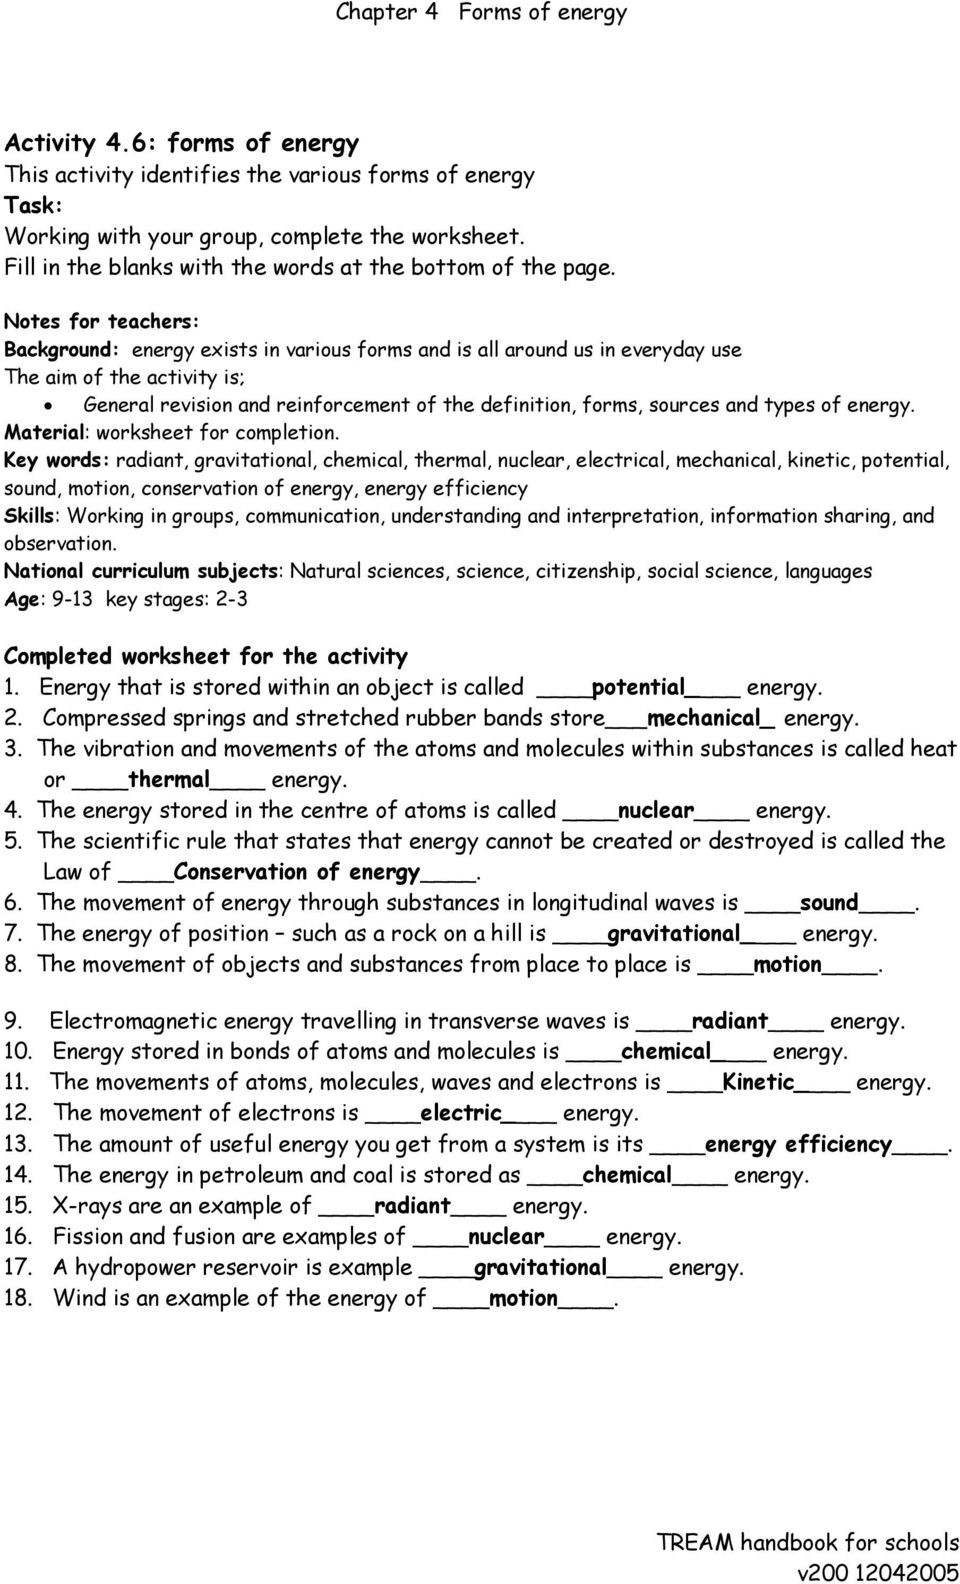 Forms Of Energy Worksheet Answers Chapter 4 forms Of Energy Pdf Free Download